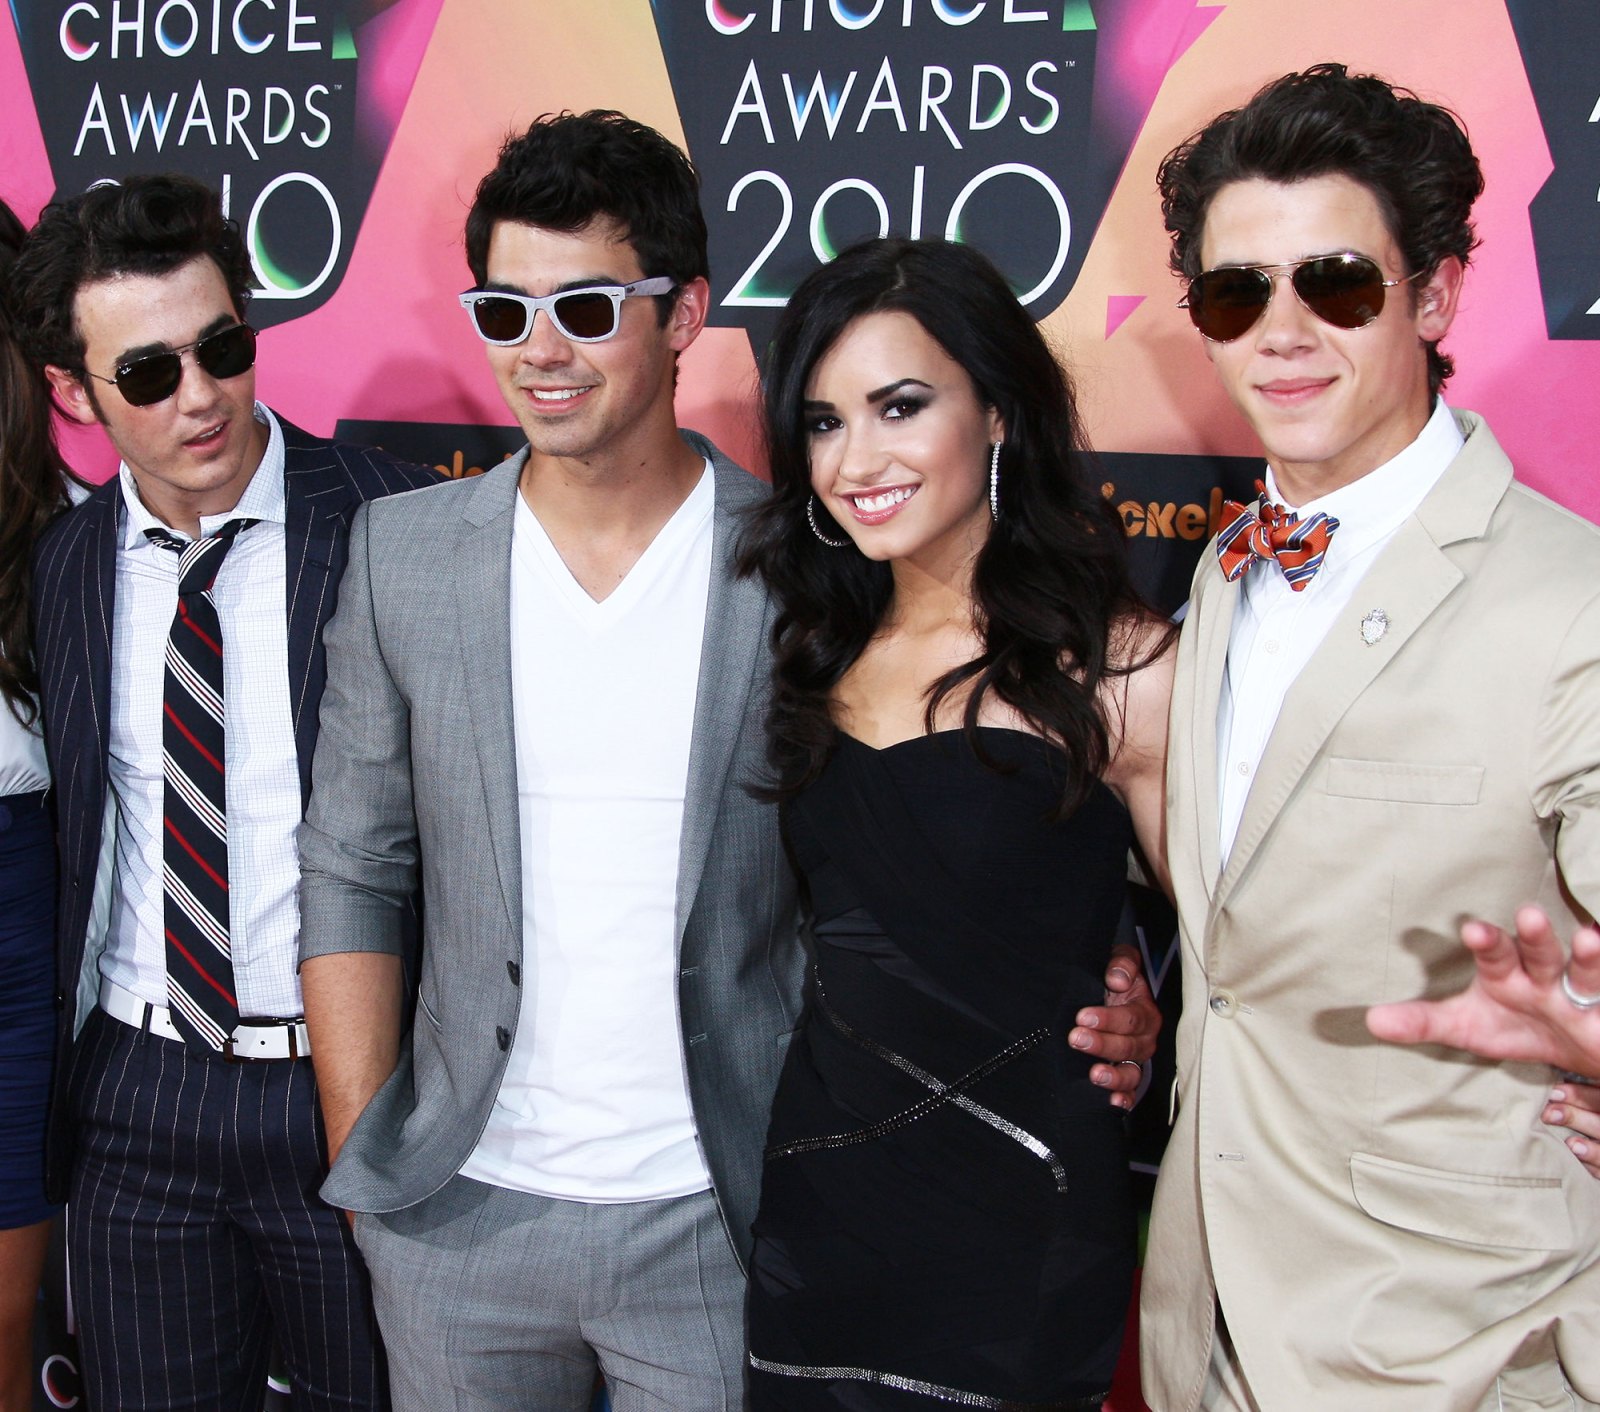 Jonas Brothers Support Demi Lovato After Apparent Drug Overdose